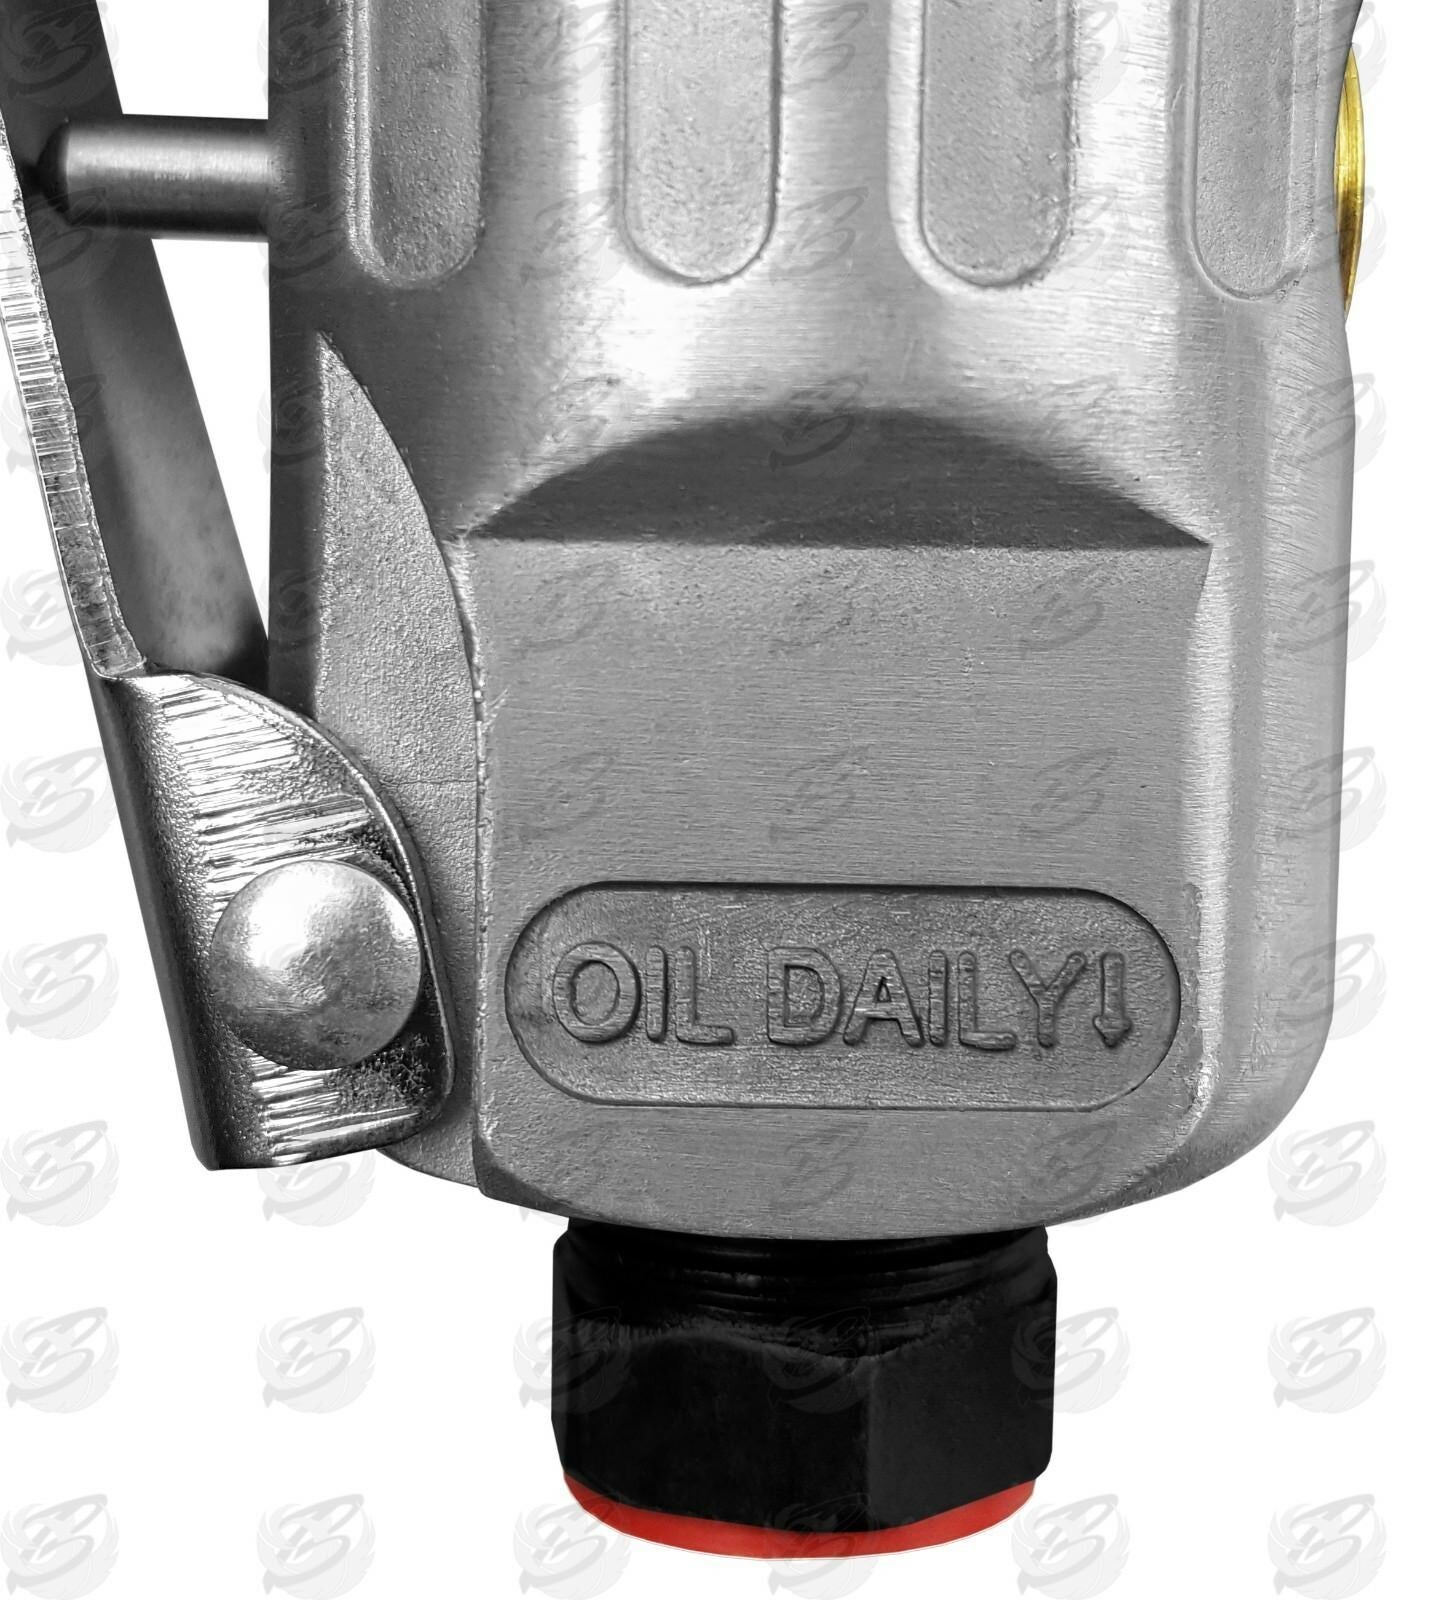 TOOLZONE 1/2" DRIVE AIR IMPACT RATCHET WRENCH